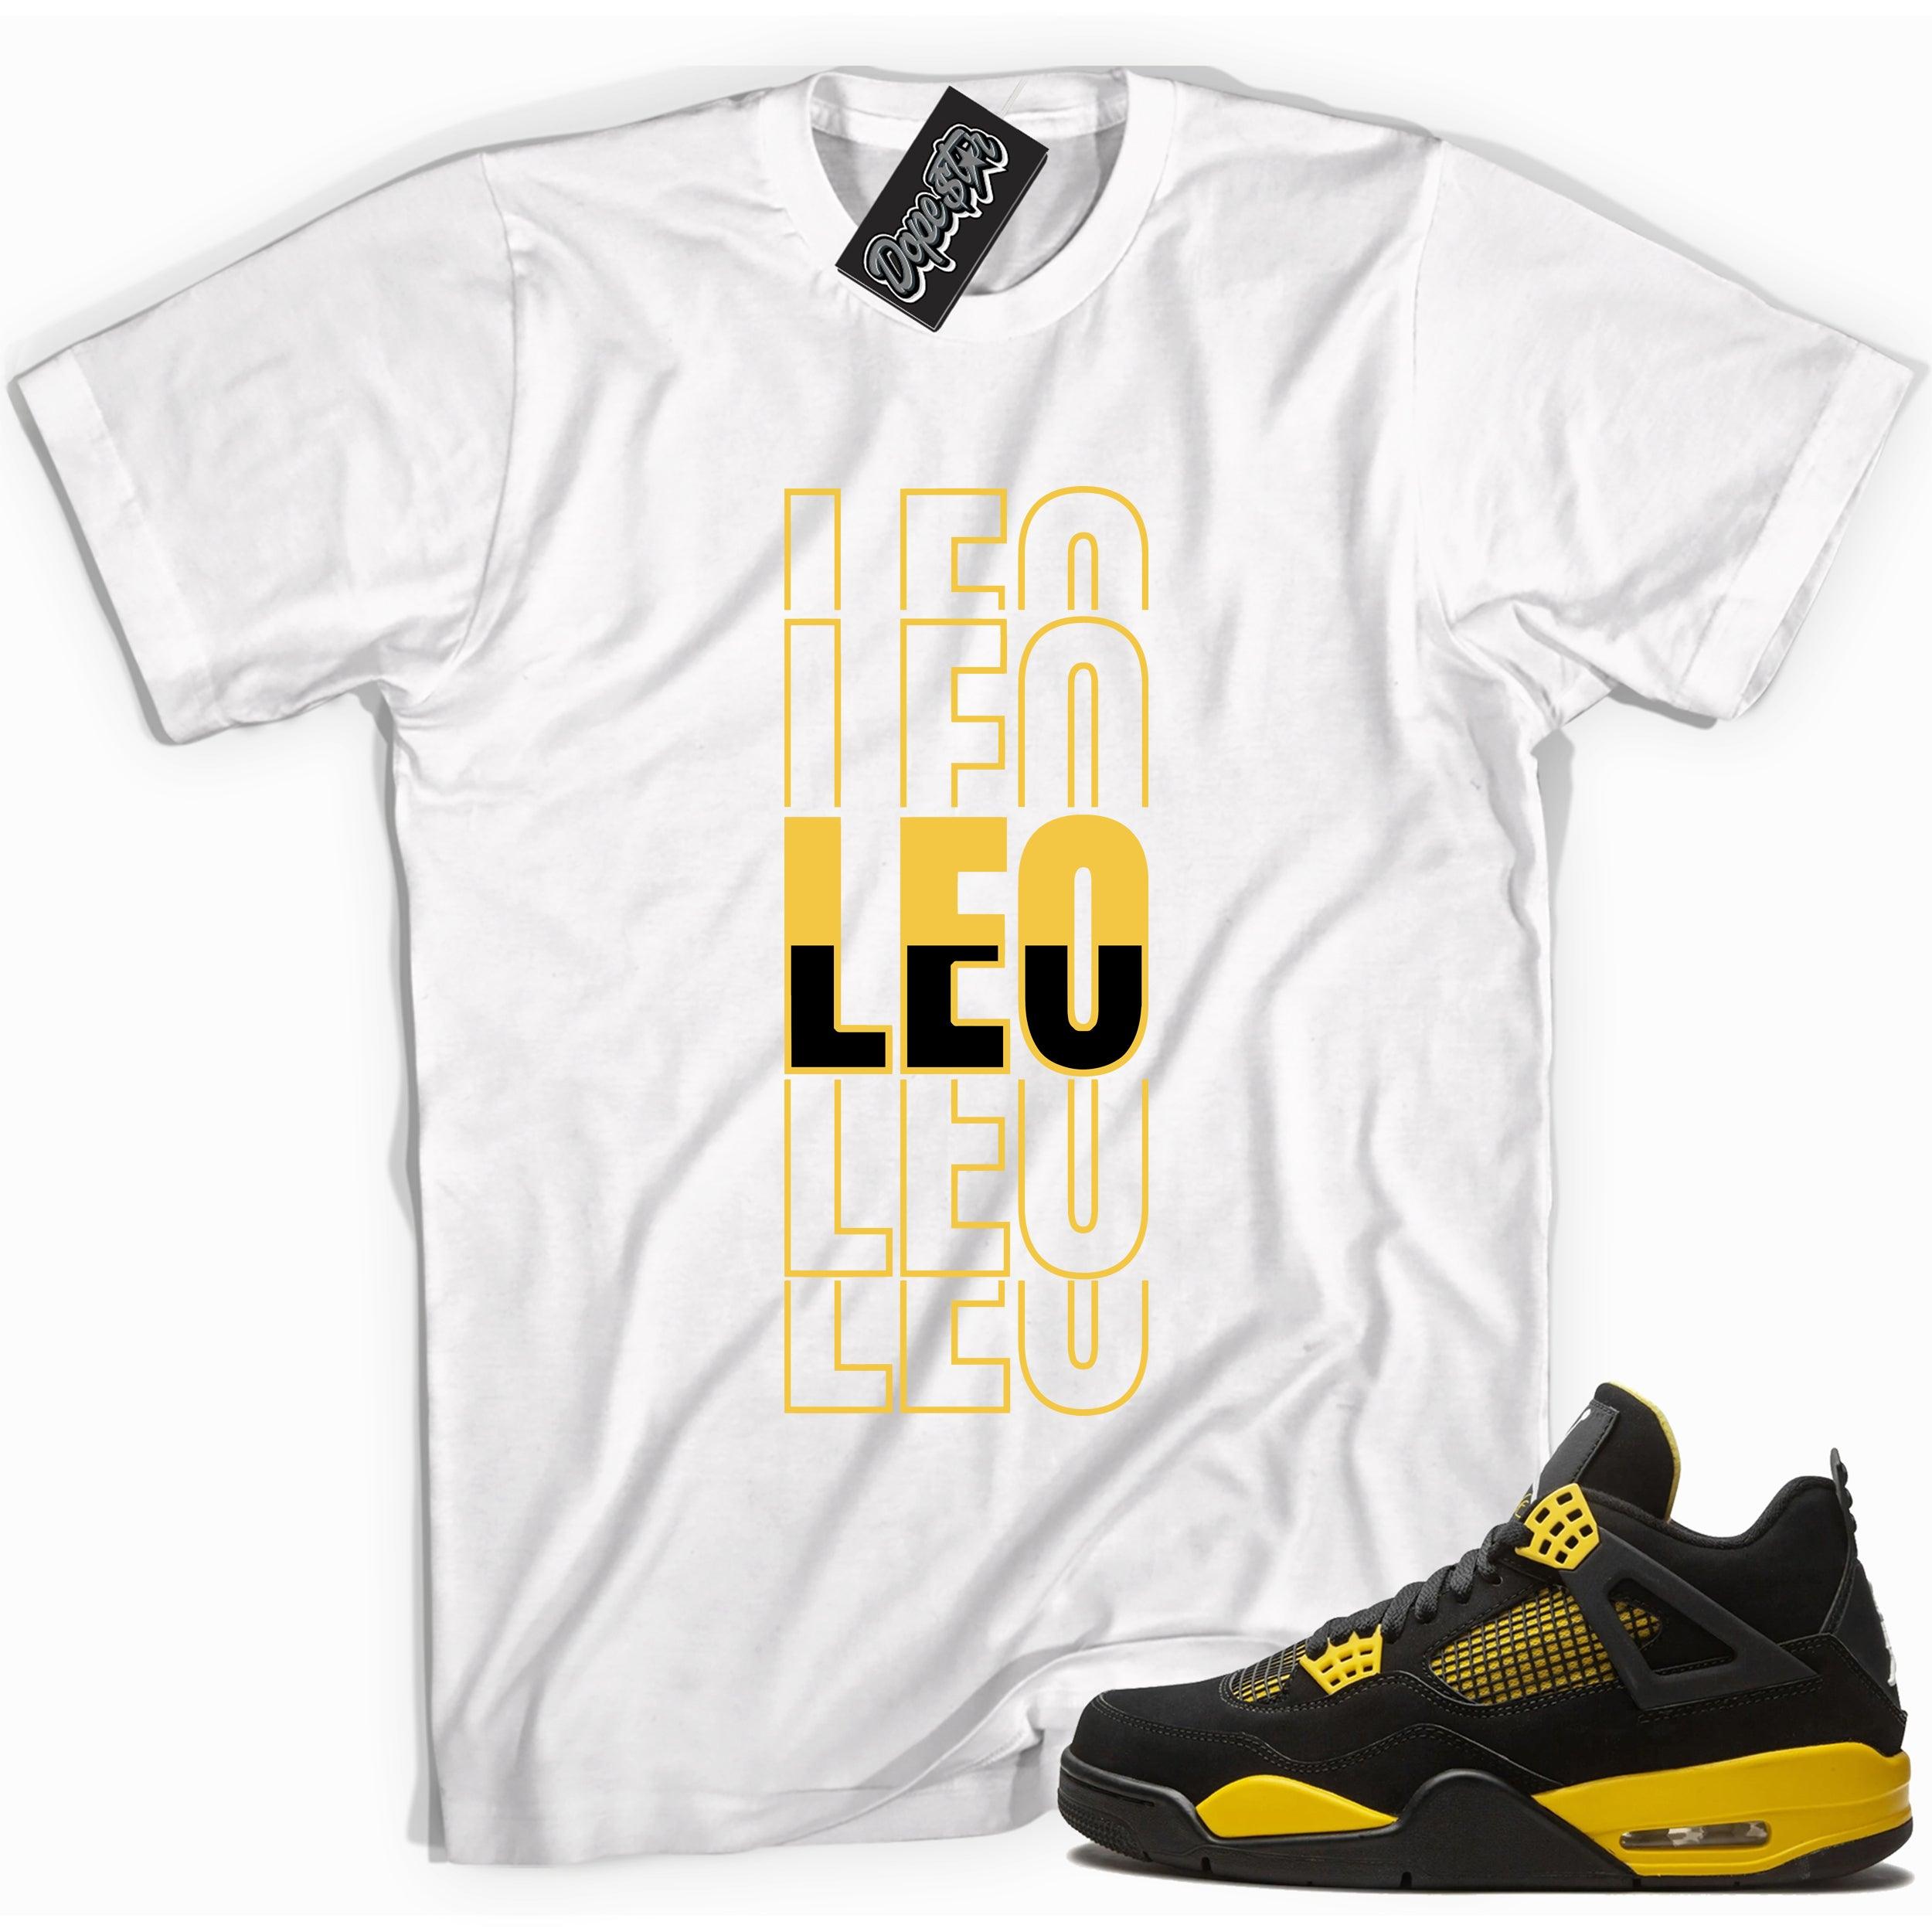 Cool white graphic tee with 'leo' print, that perfectly matches Air Jordan 4 Thunder sneakers